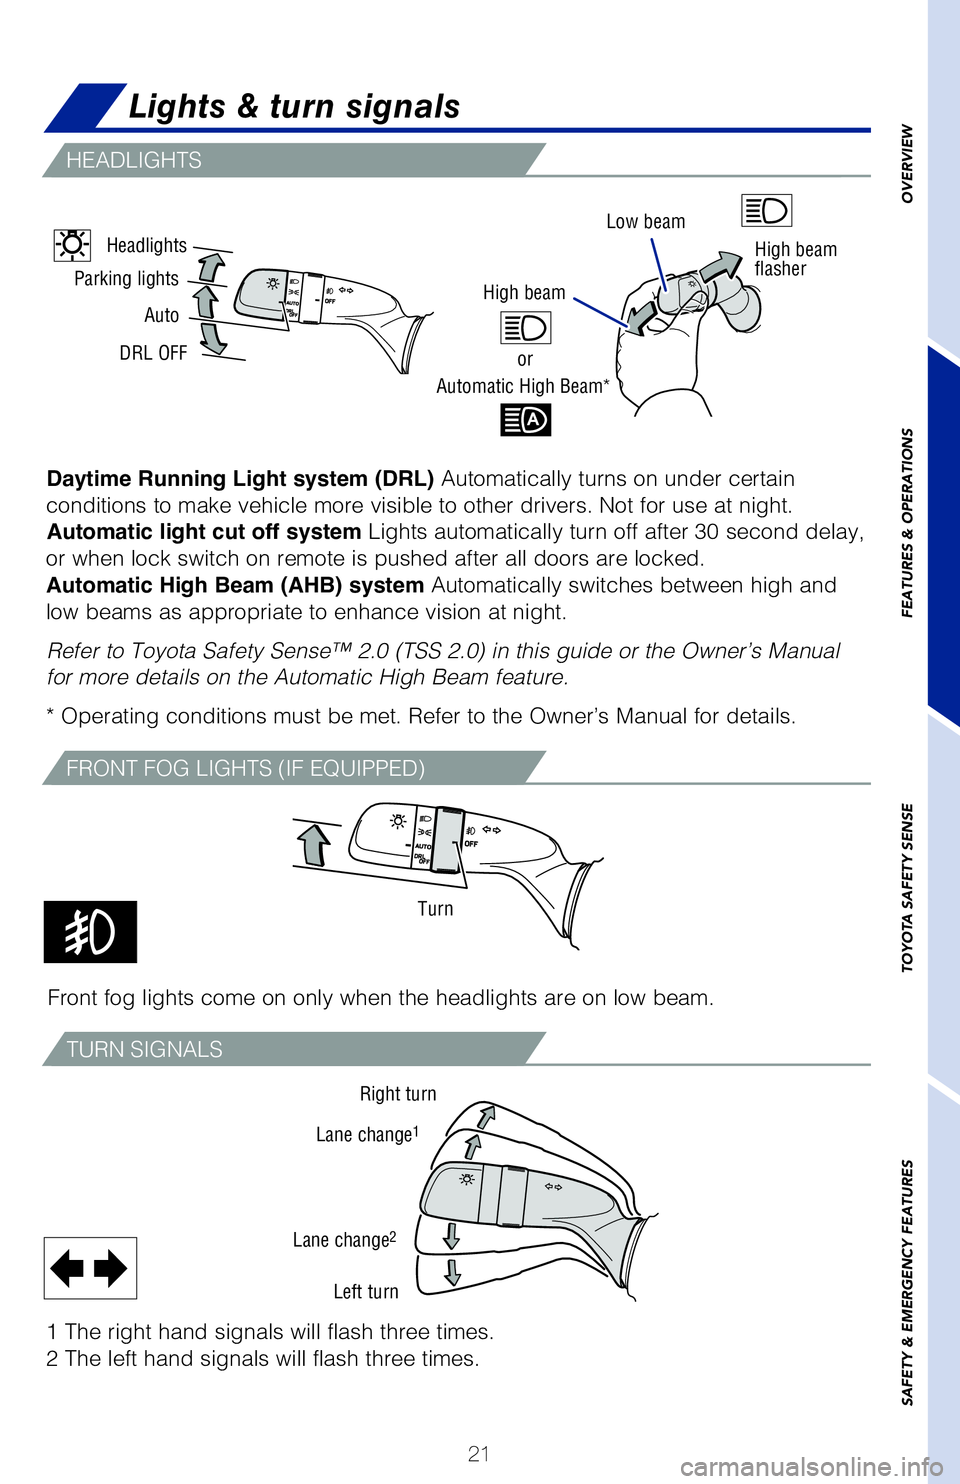 TOYOTA HIGHLANDER 2020  Owners Manual (in English) 21
OVERVIEW
FEATURES & OPERATIONS
TOYOTA SAFETY SENSE
SAFETY & EMERGENCY FEATURES
Front fog lights come on only when the headlights are on low beam.
1 The right hand signals will flash three times.
2 